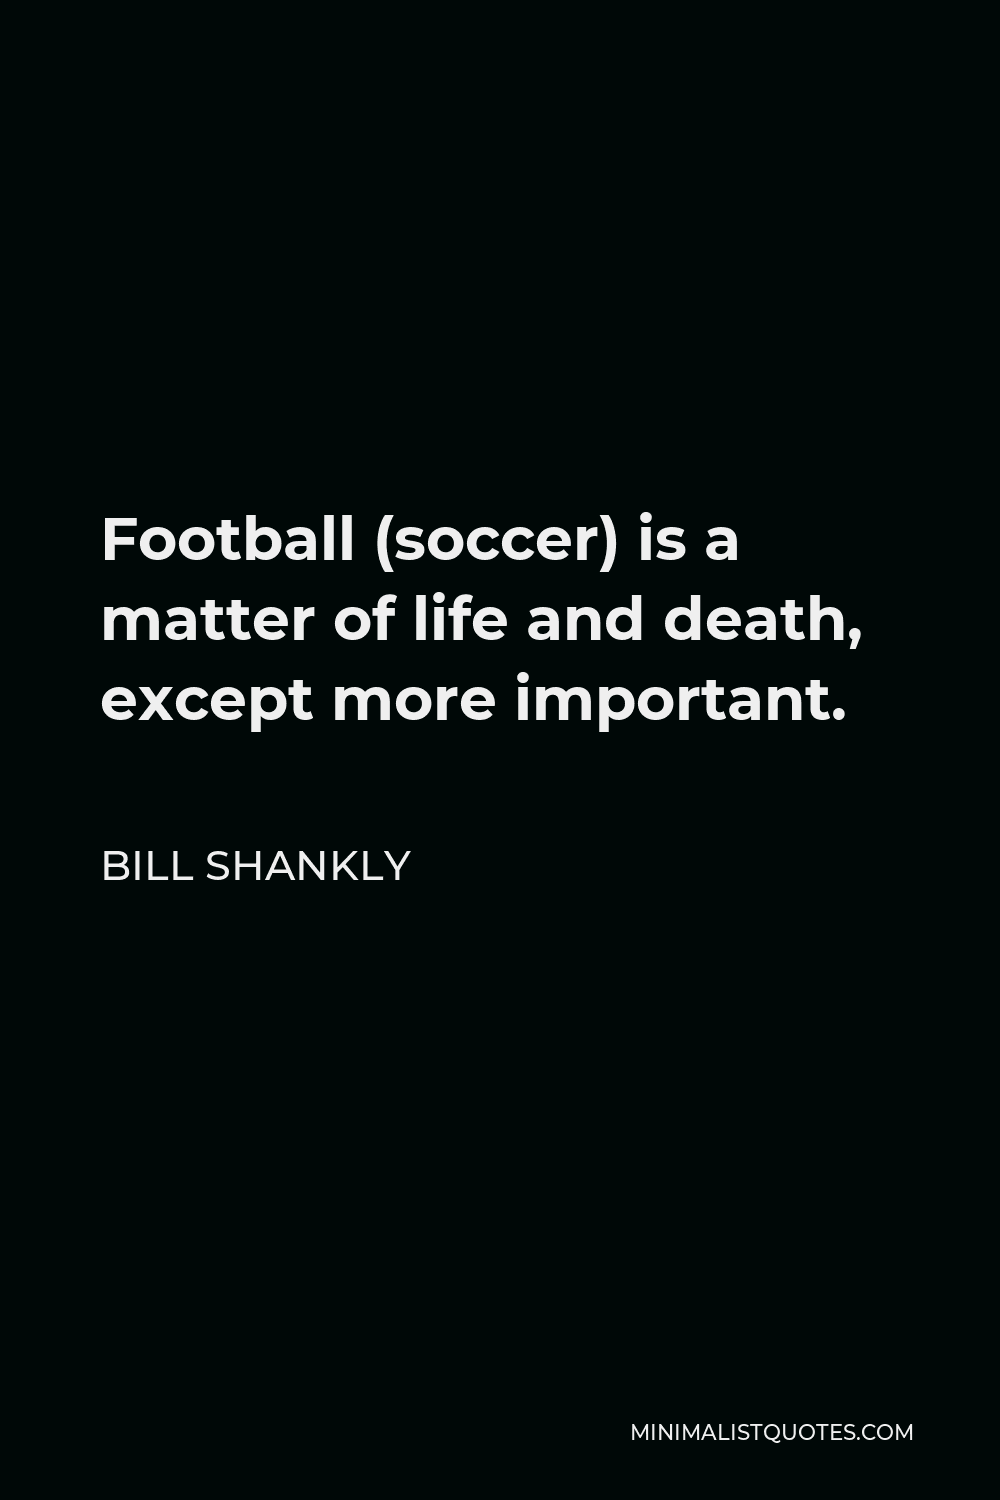 Bill Shankly Quote - Football (soccer) is a matter of life and death, except more important.